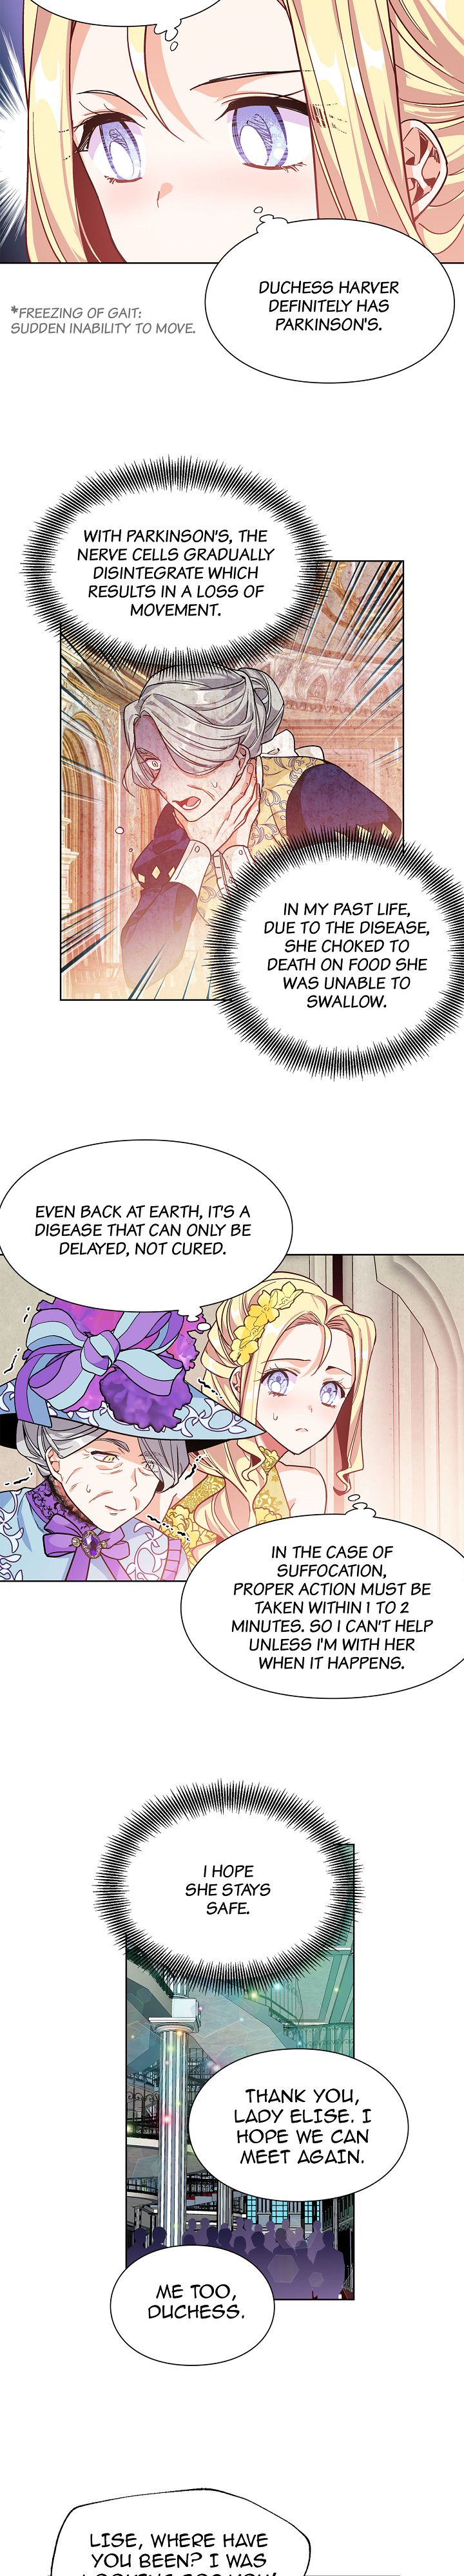 Doctor Elise – The Royal Lady with the Lamp - Chapter 33 Page 10